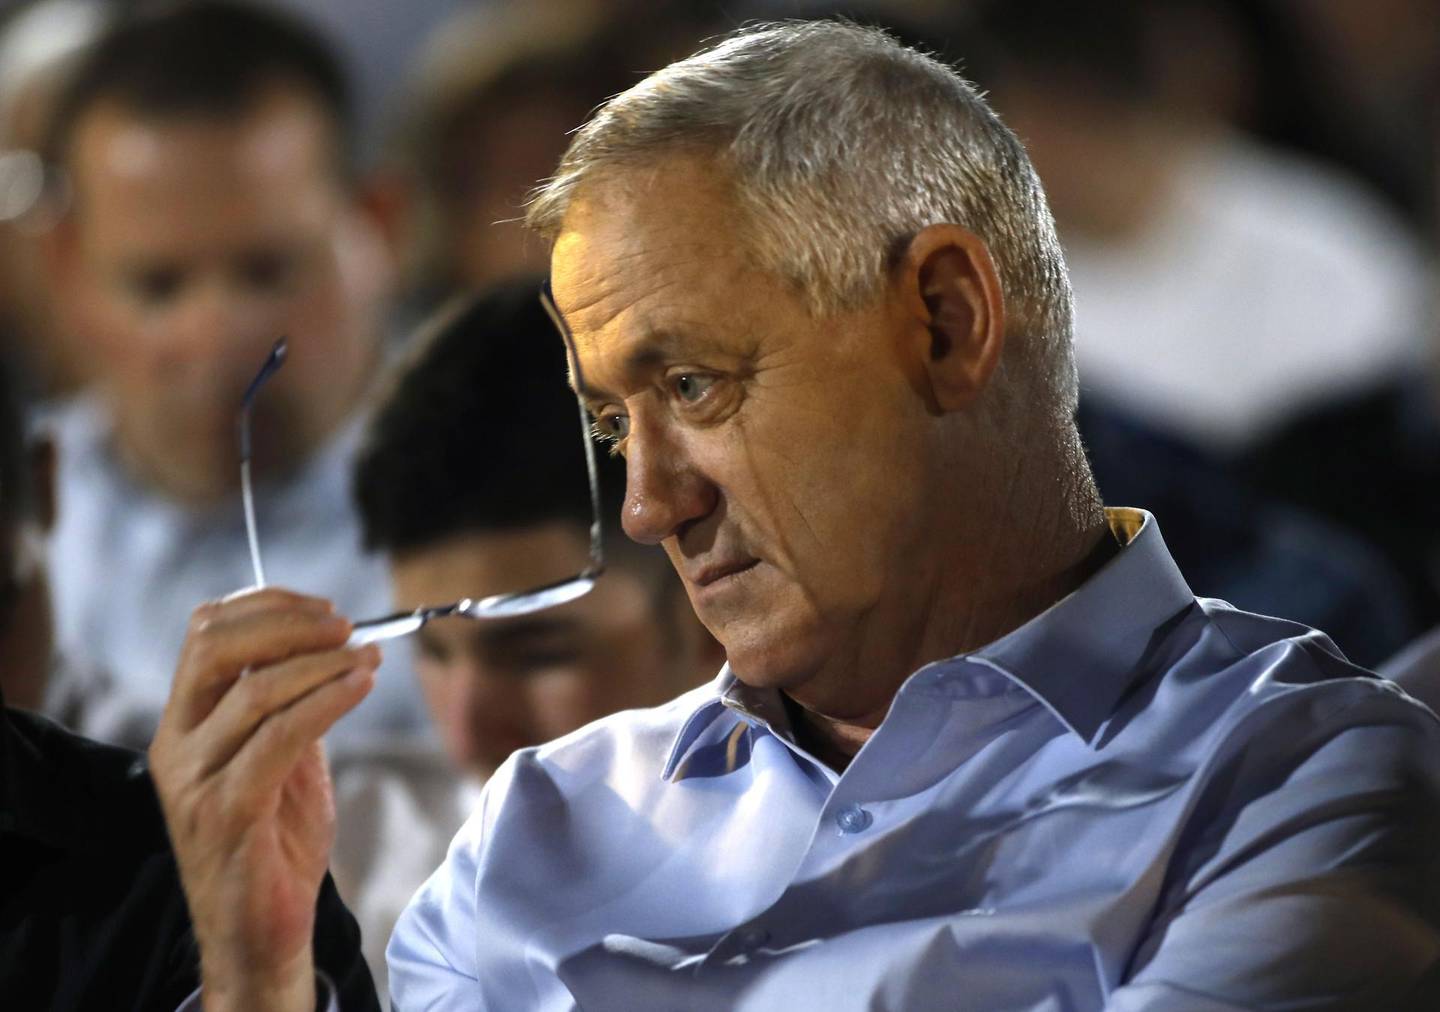 Retired Israeli General Benny Gantz, one of the leaders of the Blue and White (Kahol Lavan) political alliance, attends a campaign event in Yasud HaMaala in northern Israel on September 11, 2019. Israel will hold general elections on September 17. / AFP / JALAA MAREY
